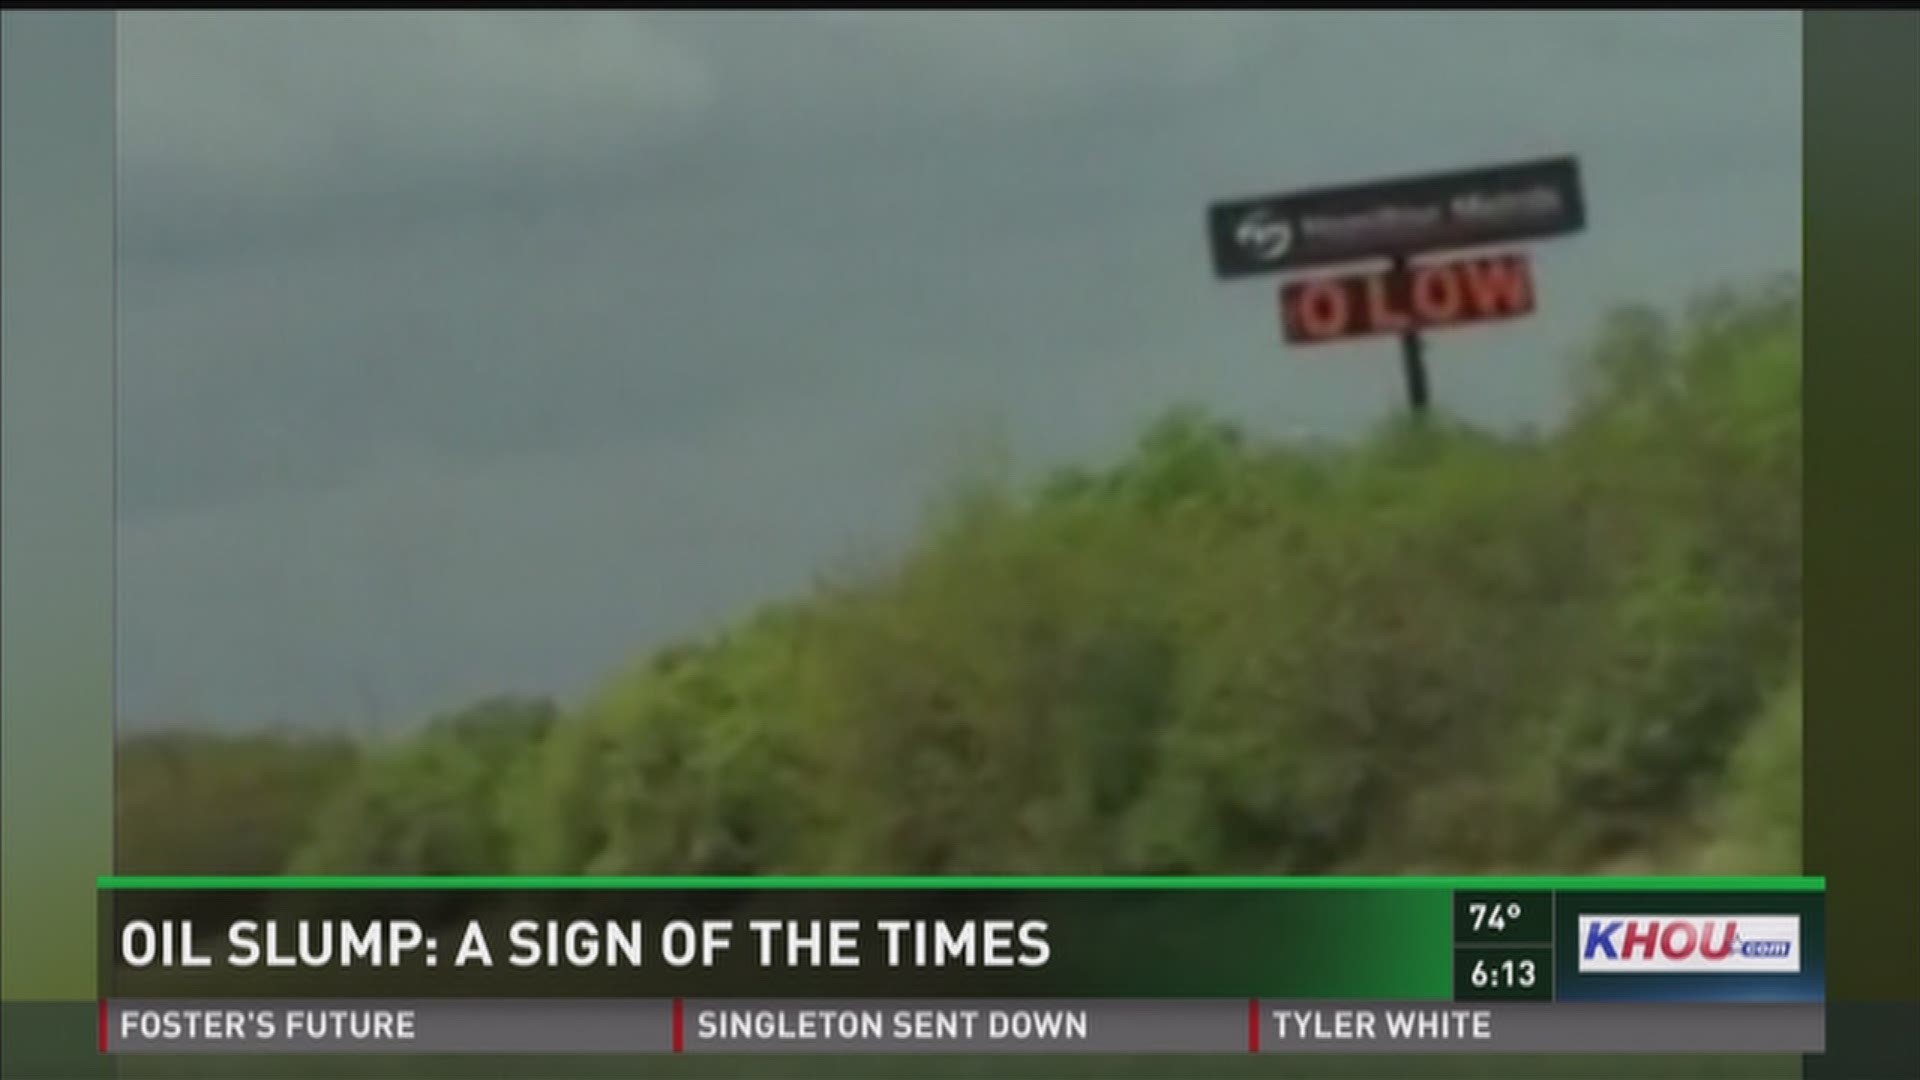 Billboards that blast oil prices hit home for many Houstonians.